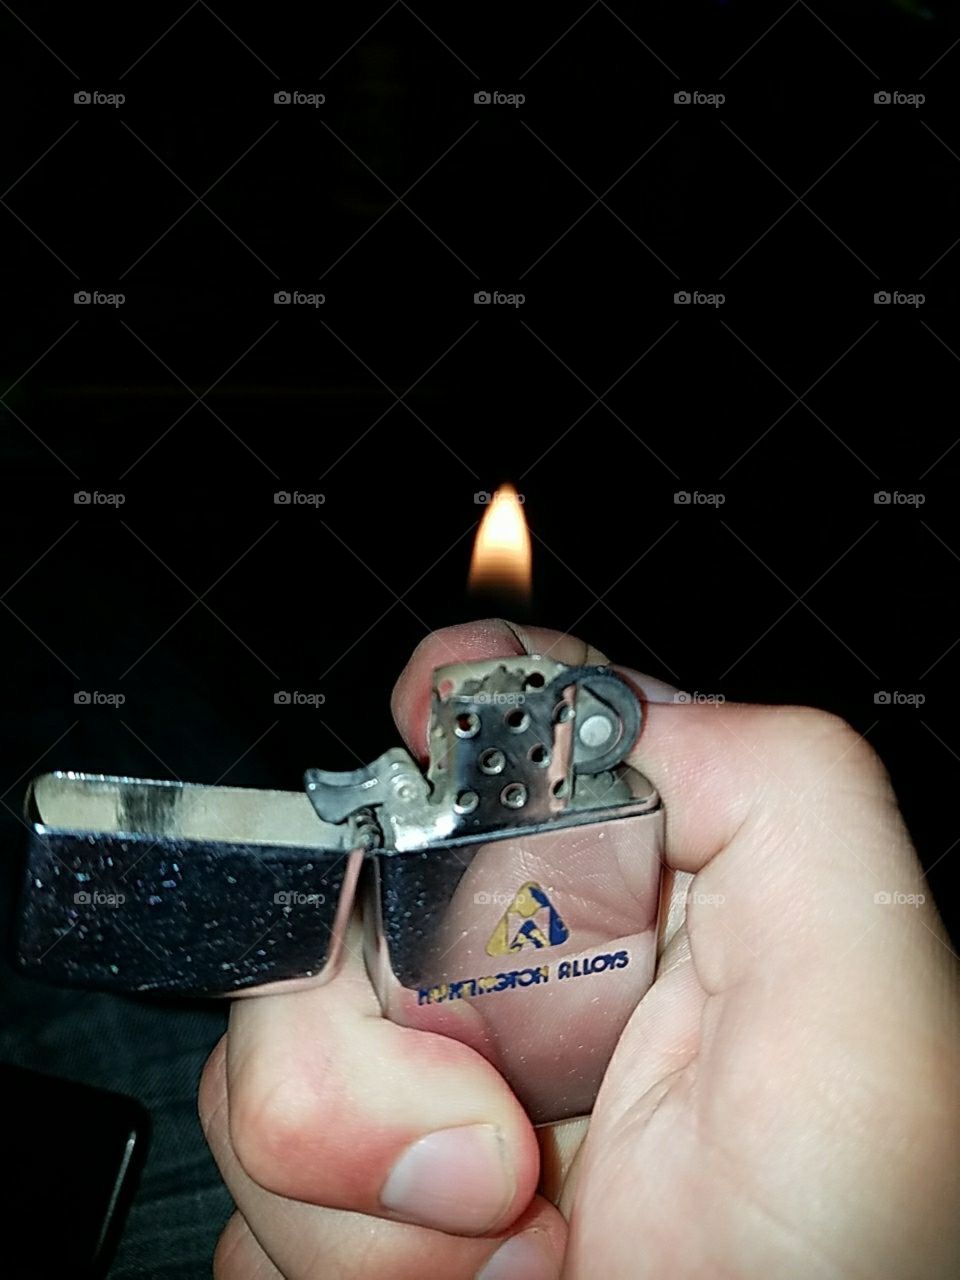 holding a lighter, black contrast, dark and bright